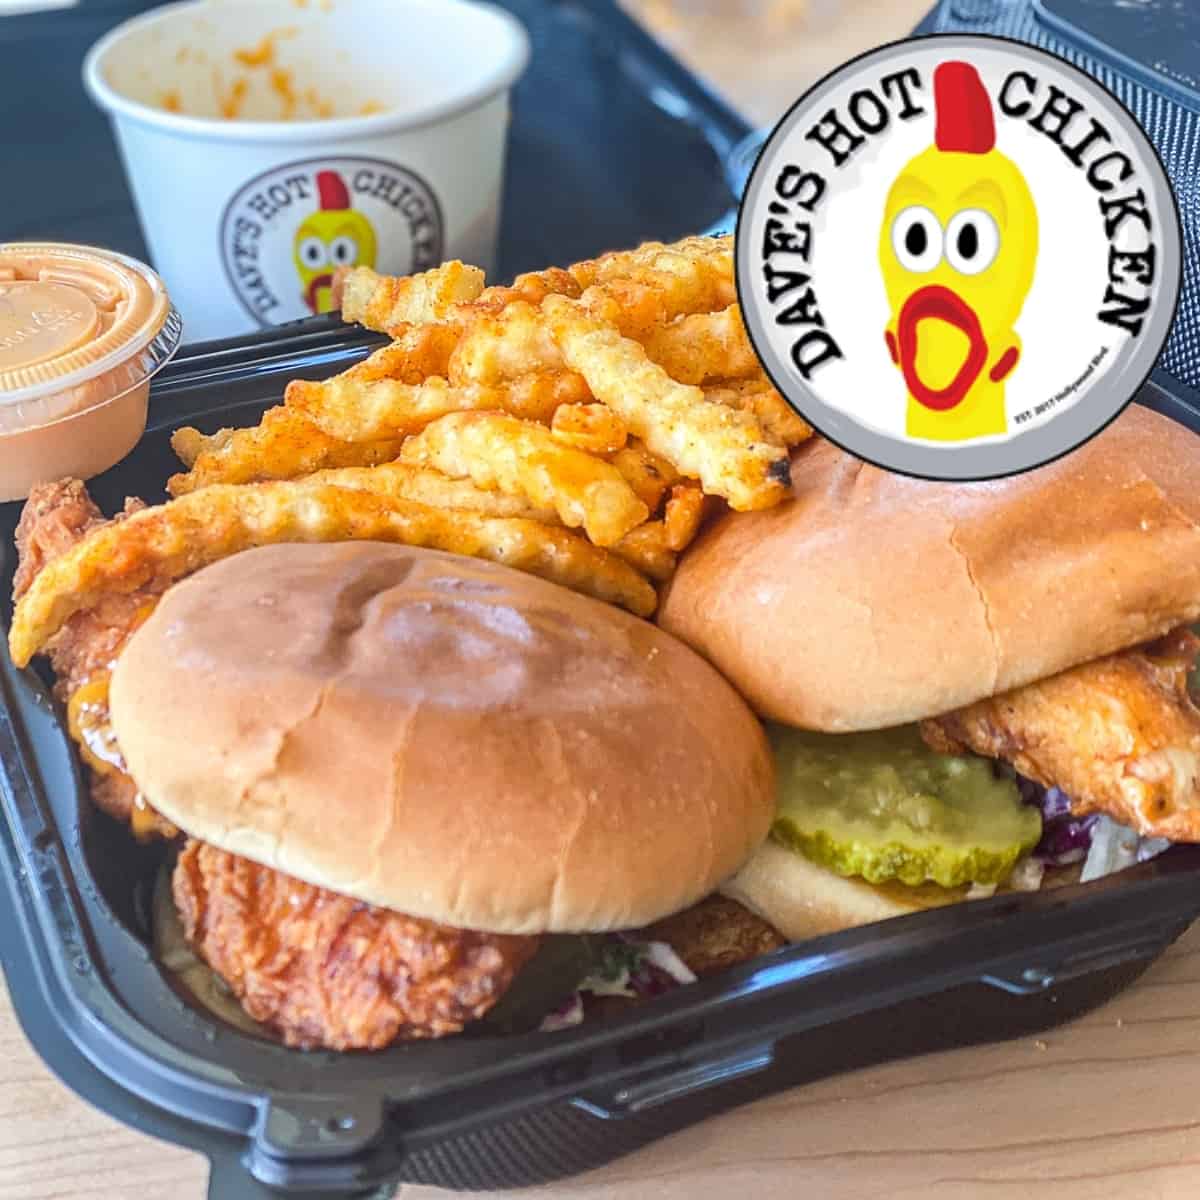 Logo of Dave's Hot Chicken restaurant with menu items including nashville style chicken sandwiches and sauce and sides.